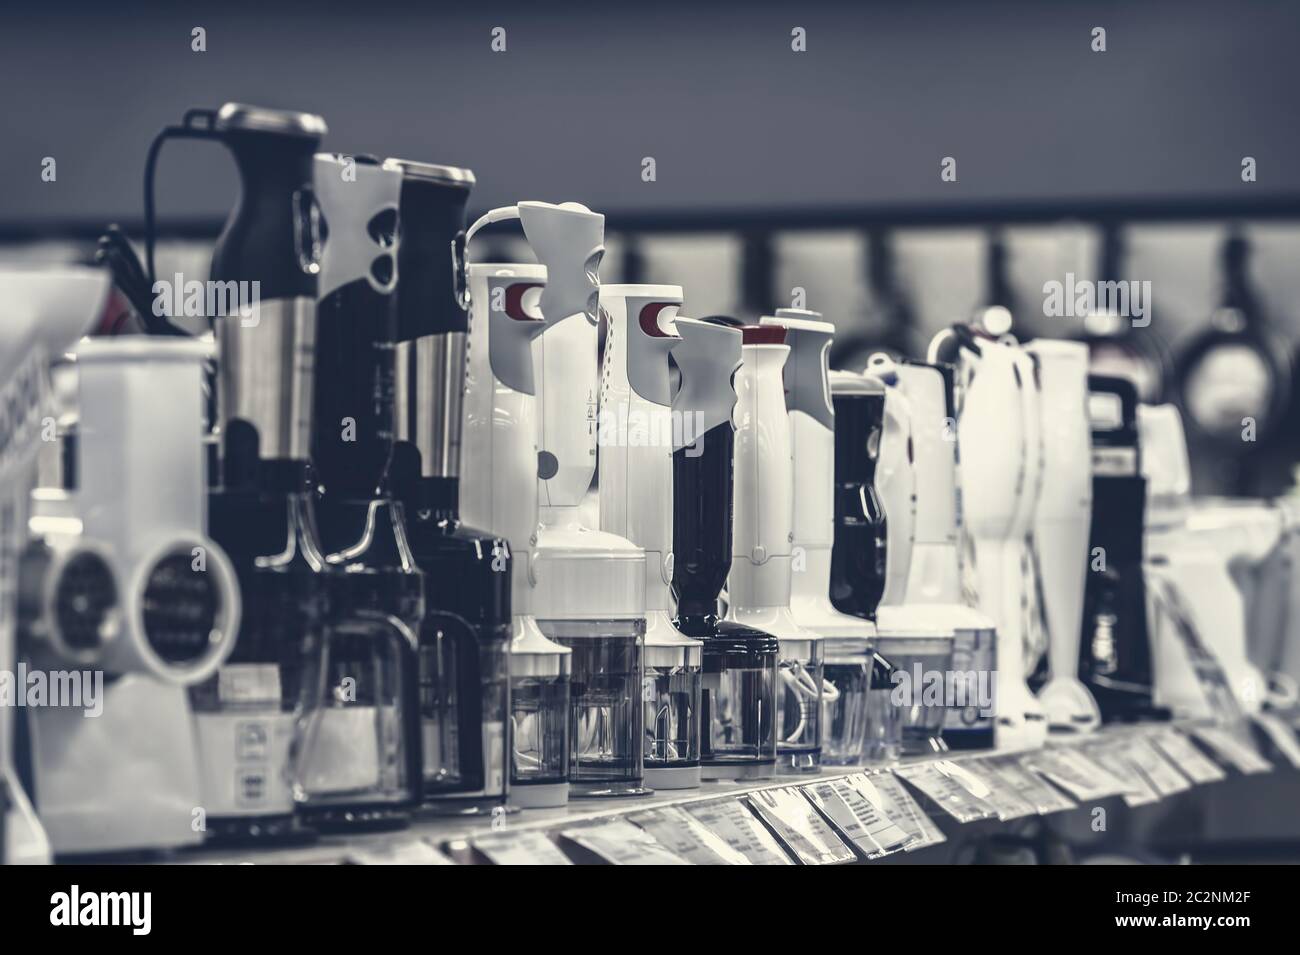 row of variety blenders in retail store Stock Photo